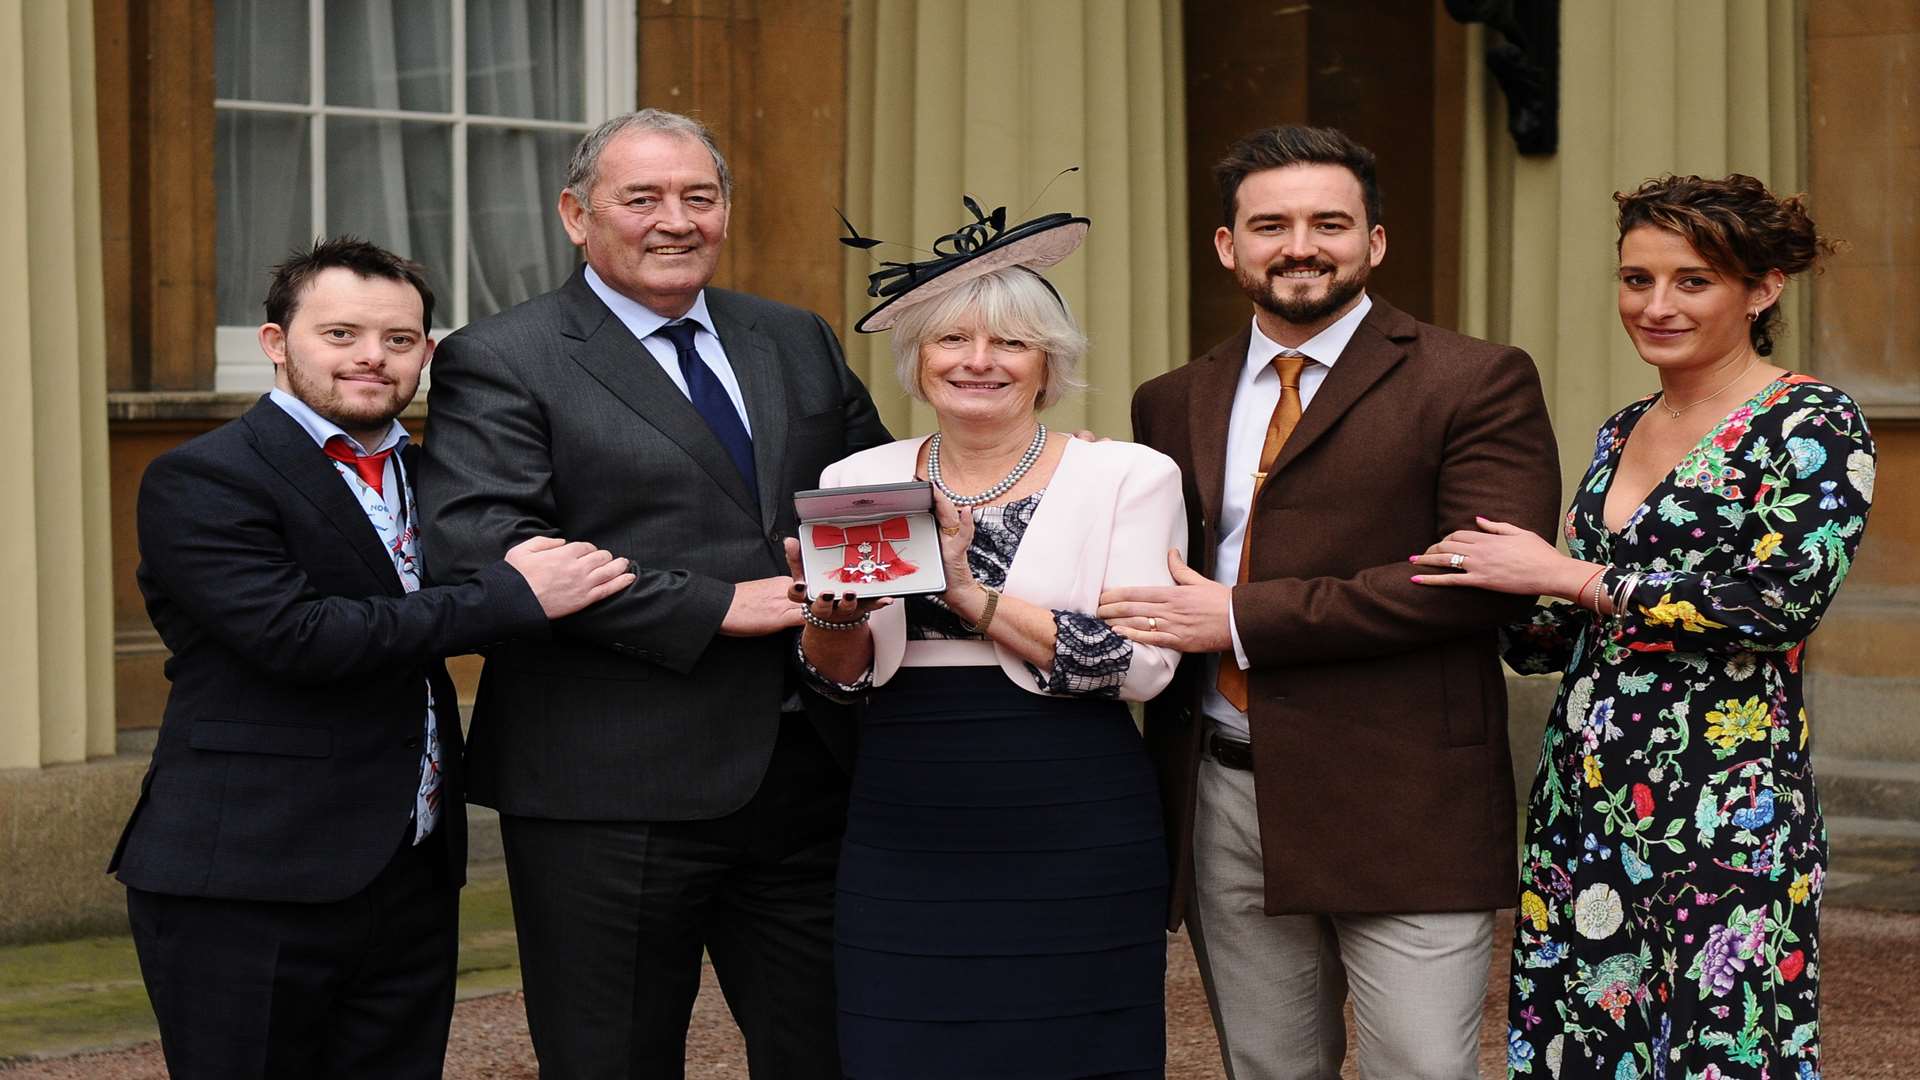 Sue Clarke MBE with son Jamie, husband Tom, son Scott and daughter Kimberley.